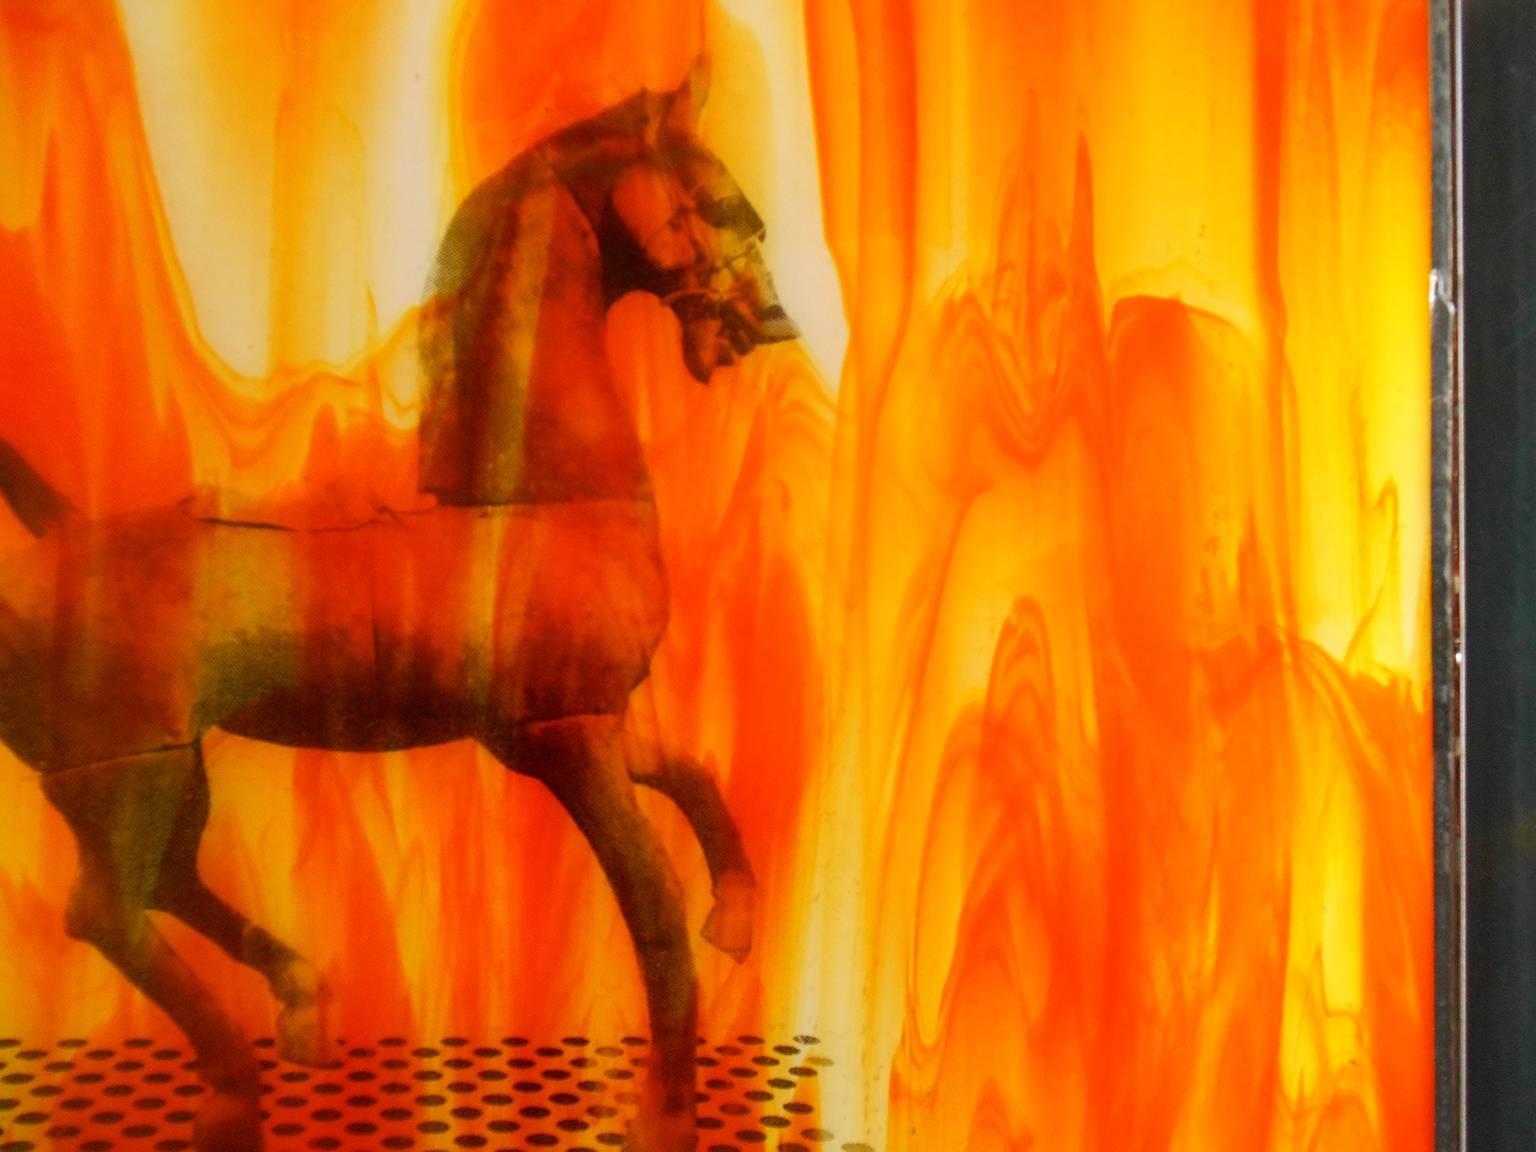 Pferd is German for horse. Sculpture from Museum Rietberg, in Zürich.

Cavalieri’s aim is to merge contemporary imagery with the time-honored processes of painted stained glass, a material with a powerful spiritual history. He incorporates